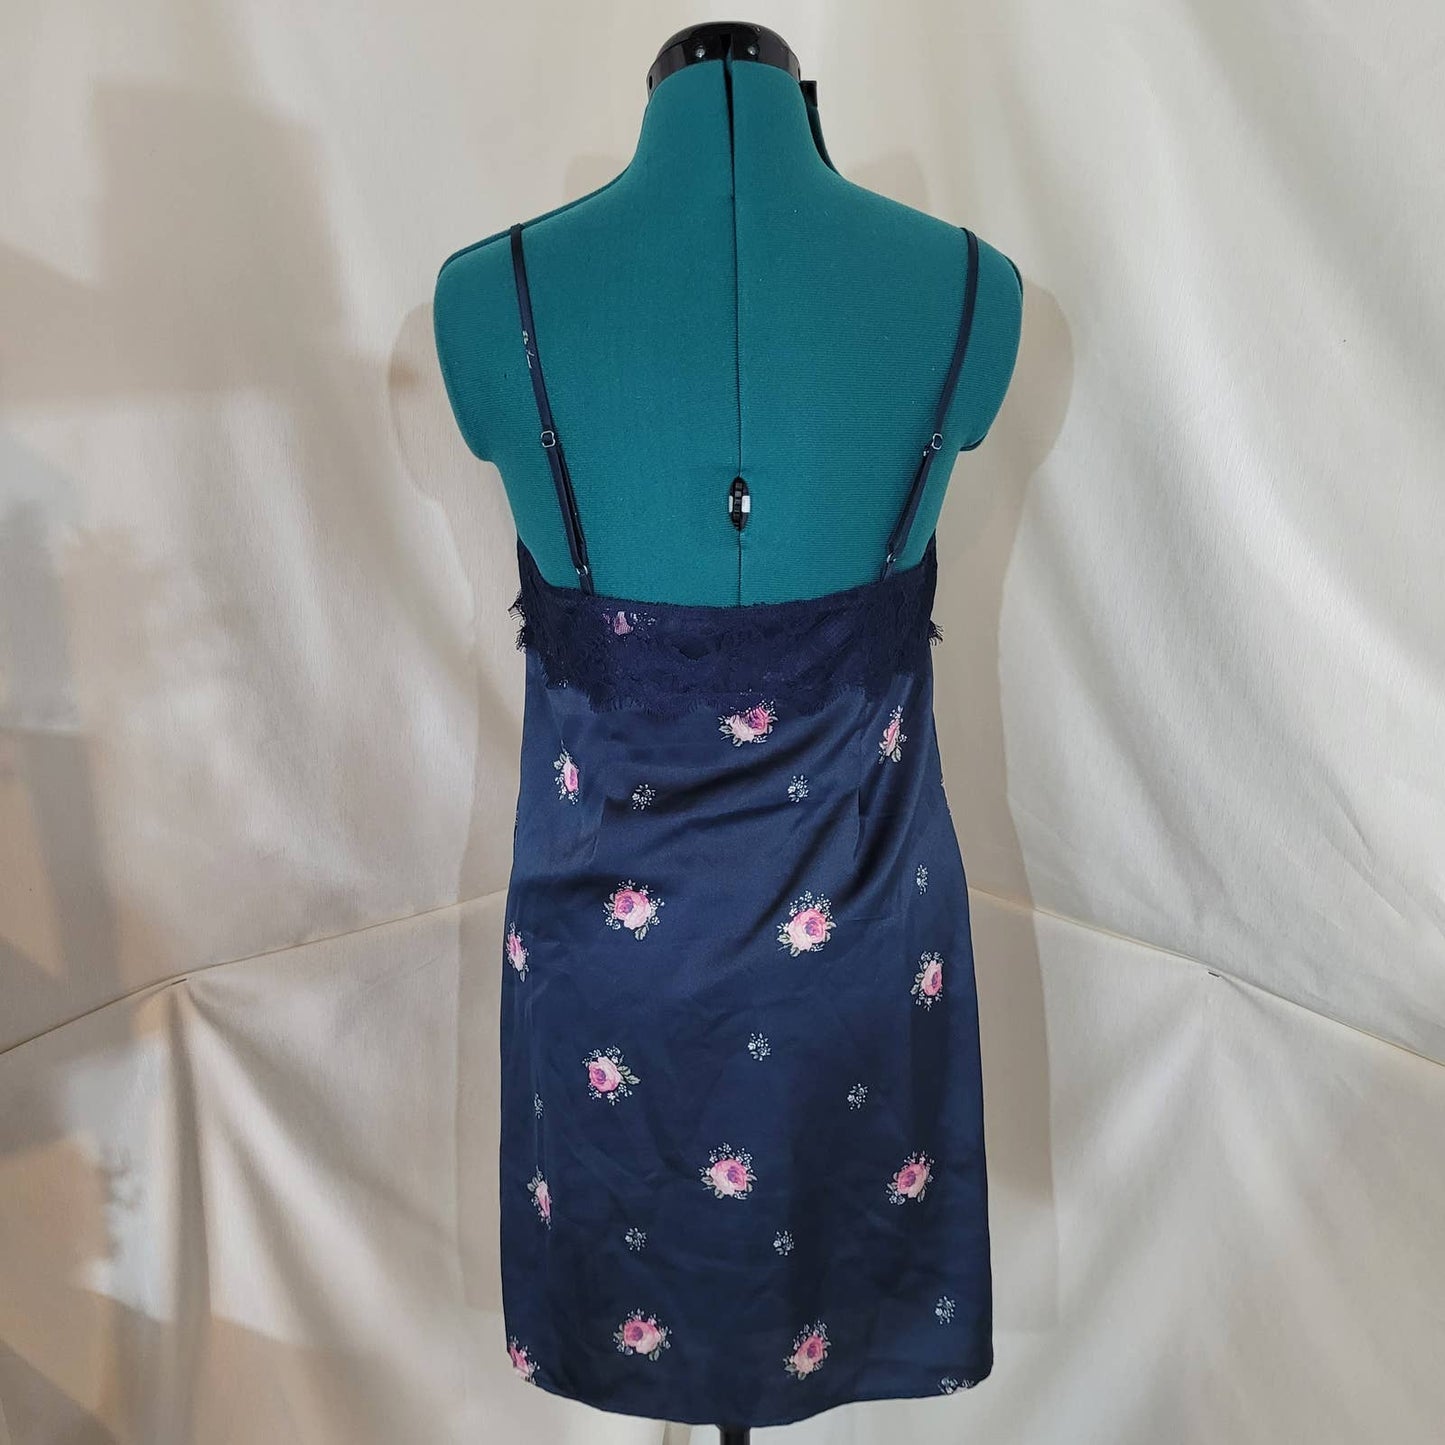 Abercrombie and Fitch Blue Floral Satin Lace V-Neck Slip Dress - Size Small